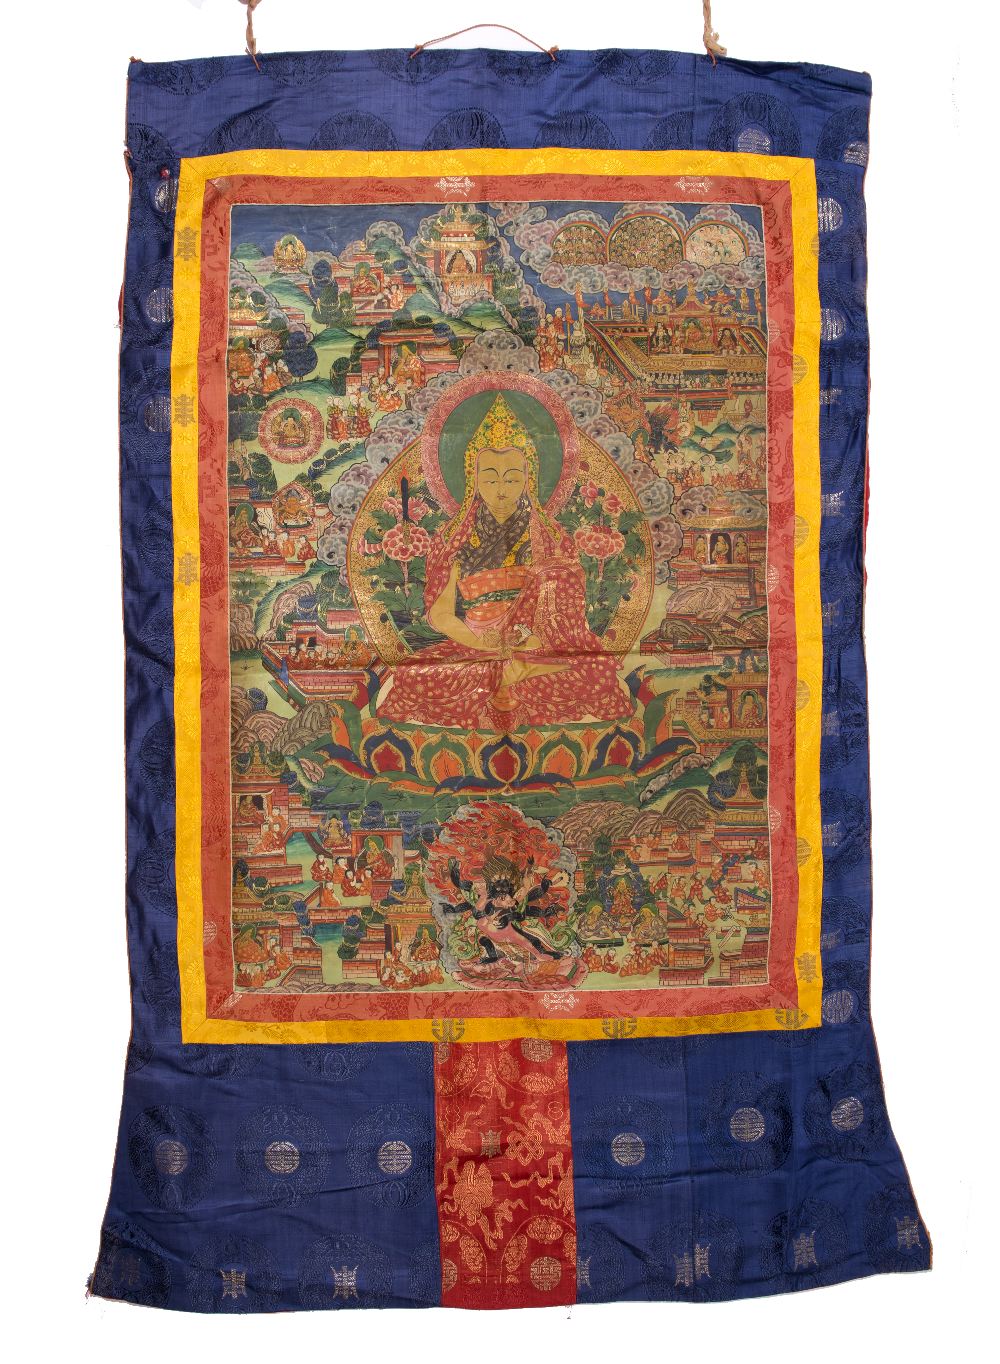 Two Thangkas Tibetan 20th Century one painted with Padmasambhava and his attendants, 89cm x 60cm and - Image 2 of 2